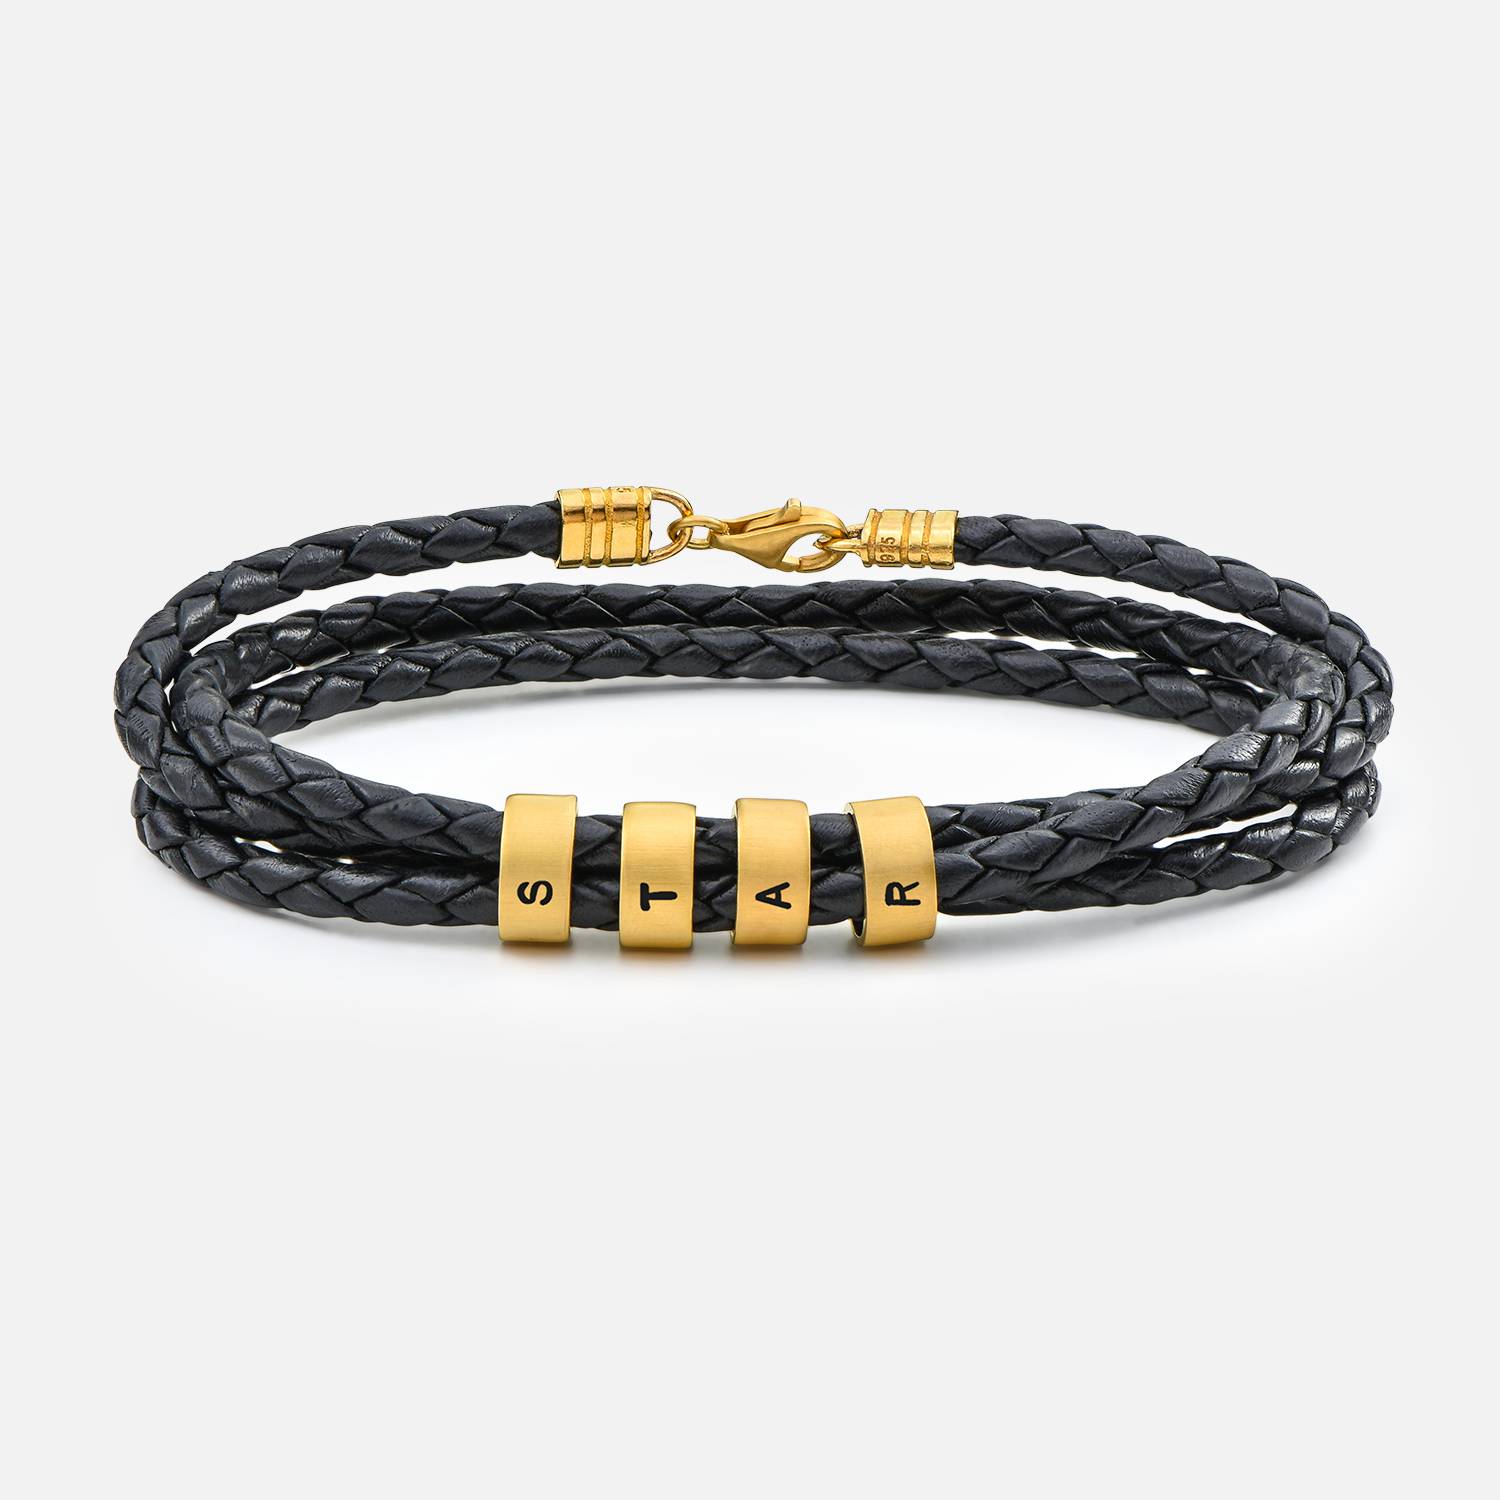 Navigator Braided Leather Bracelet for Men with Small Custom Beads in product photo